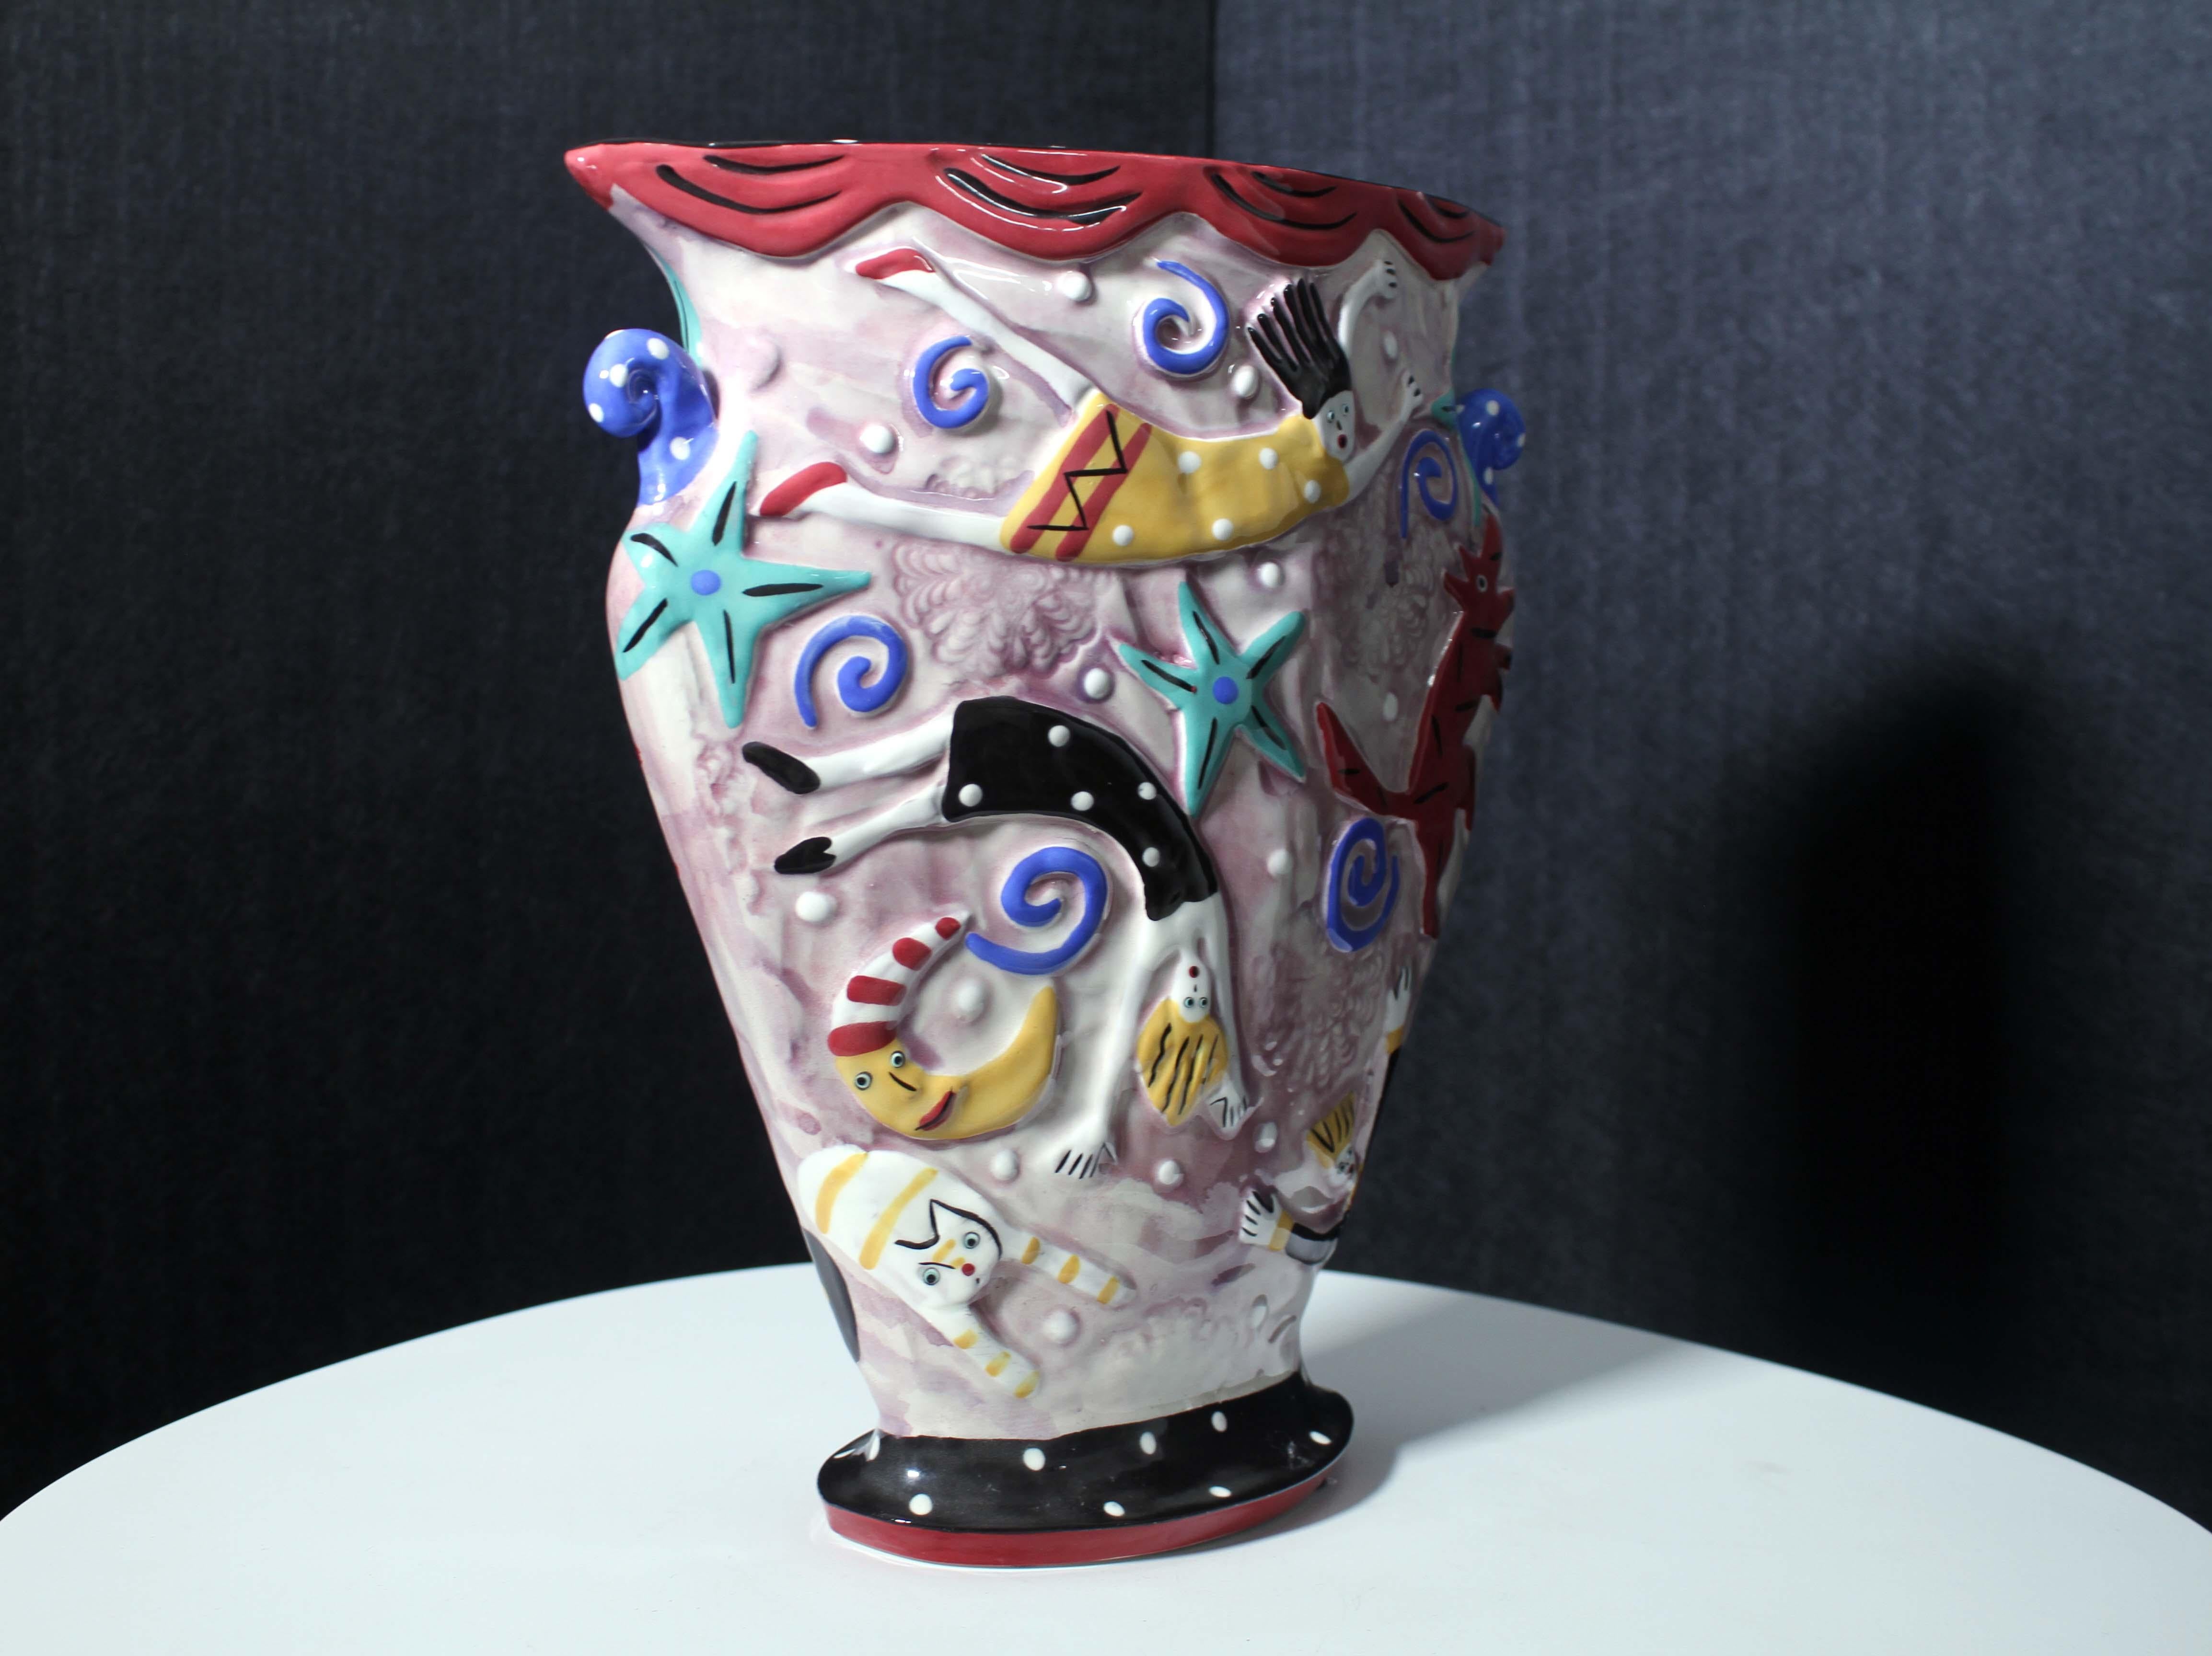 A folk art inspired handmade built slab ceramic vase titled “In My Dreams We Fly” by Dana Simson of Chesapeake East. A unique composition with floating figures, animals, and celestial designs. Stamped on the bottom. Created in 2001. Adds an element